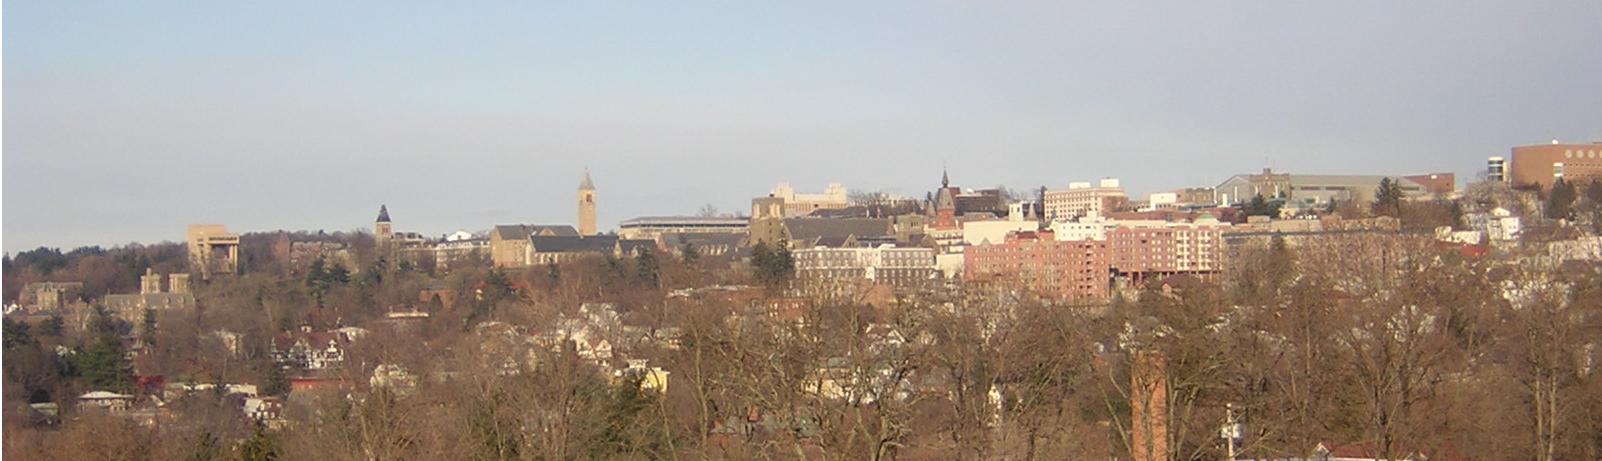 The East Hill area of the city:  Cornell University campus and Collegetown